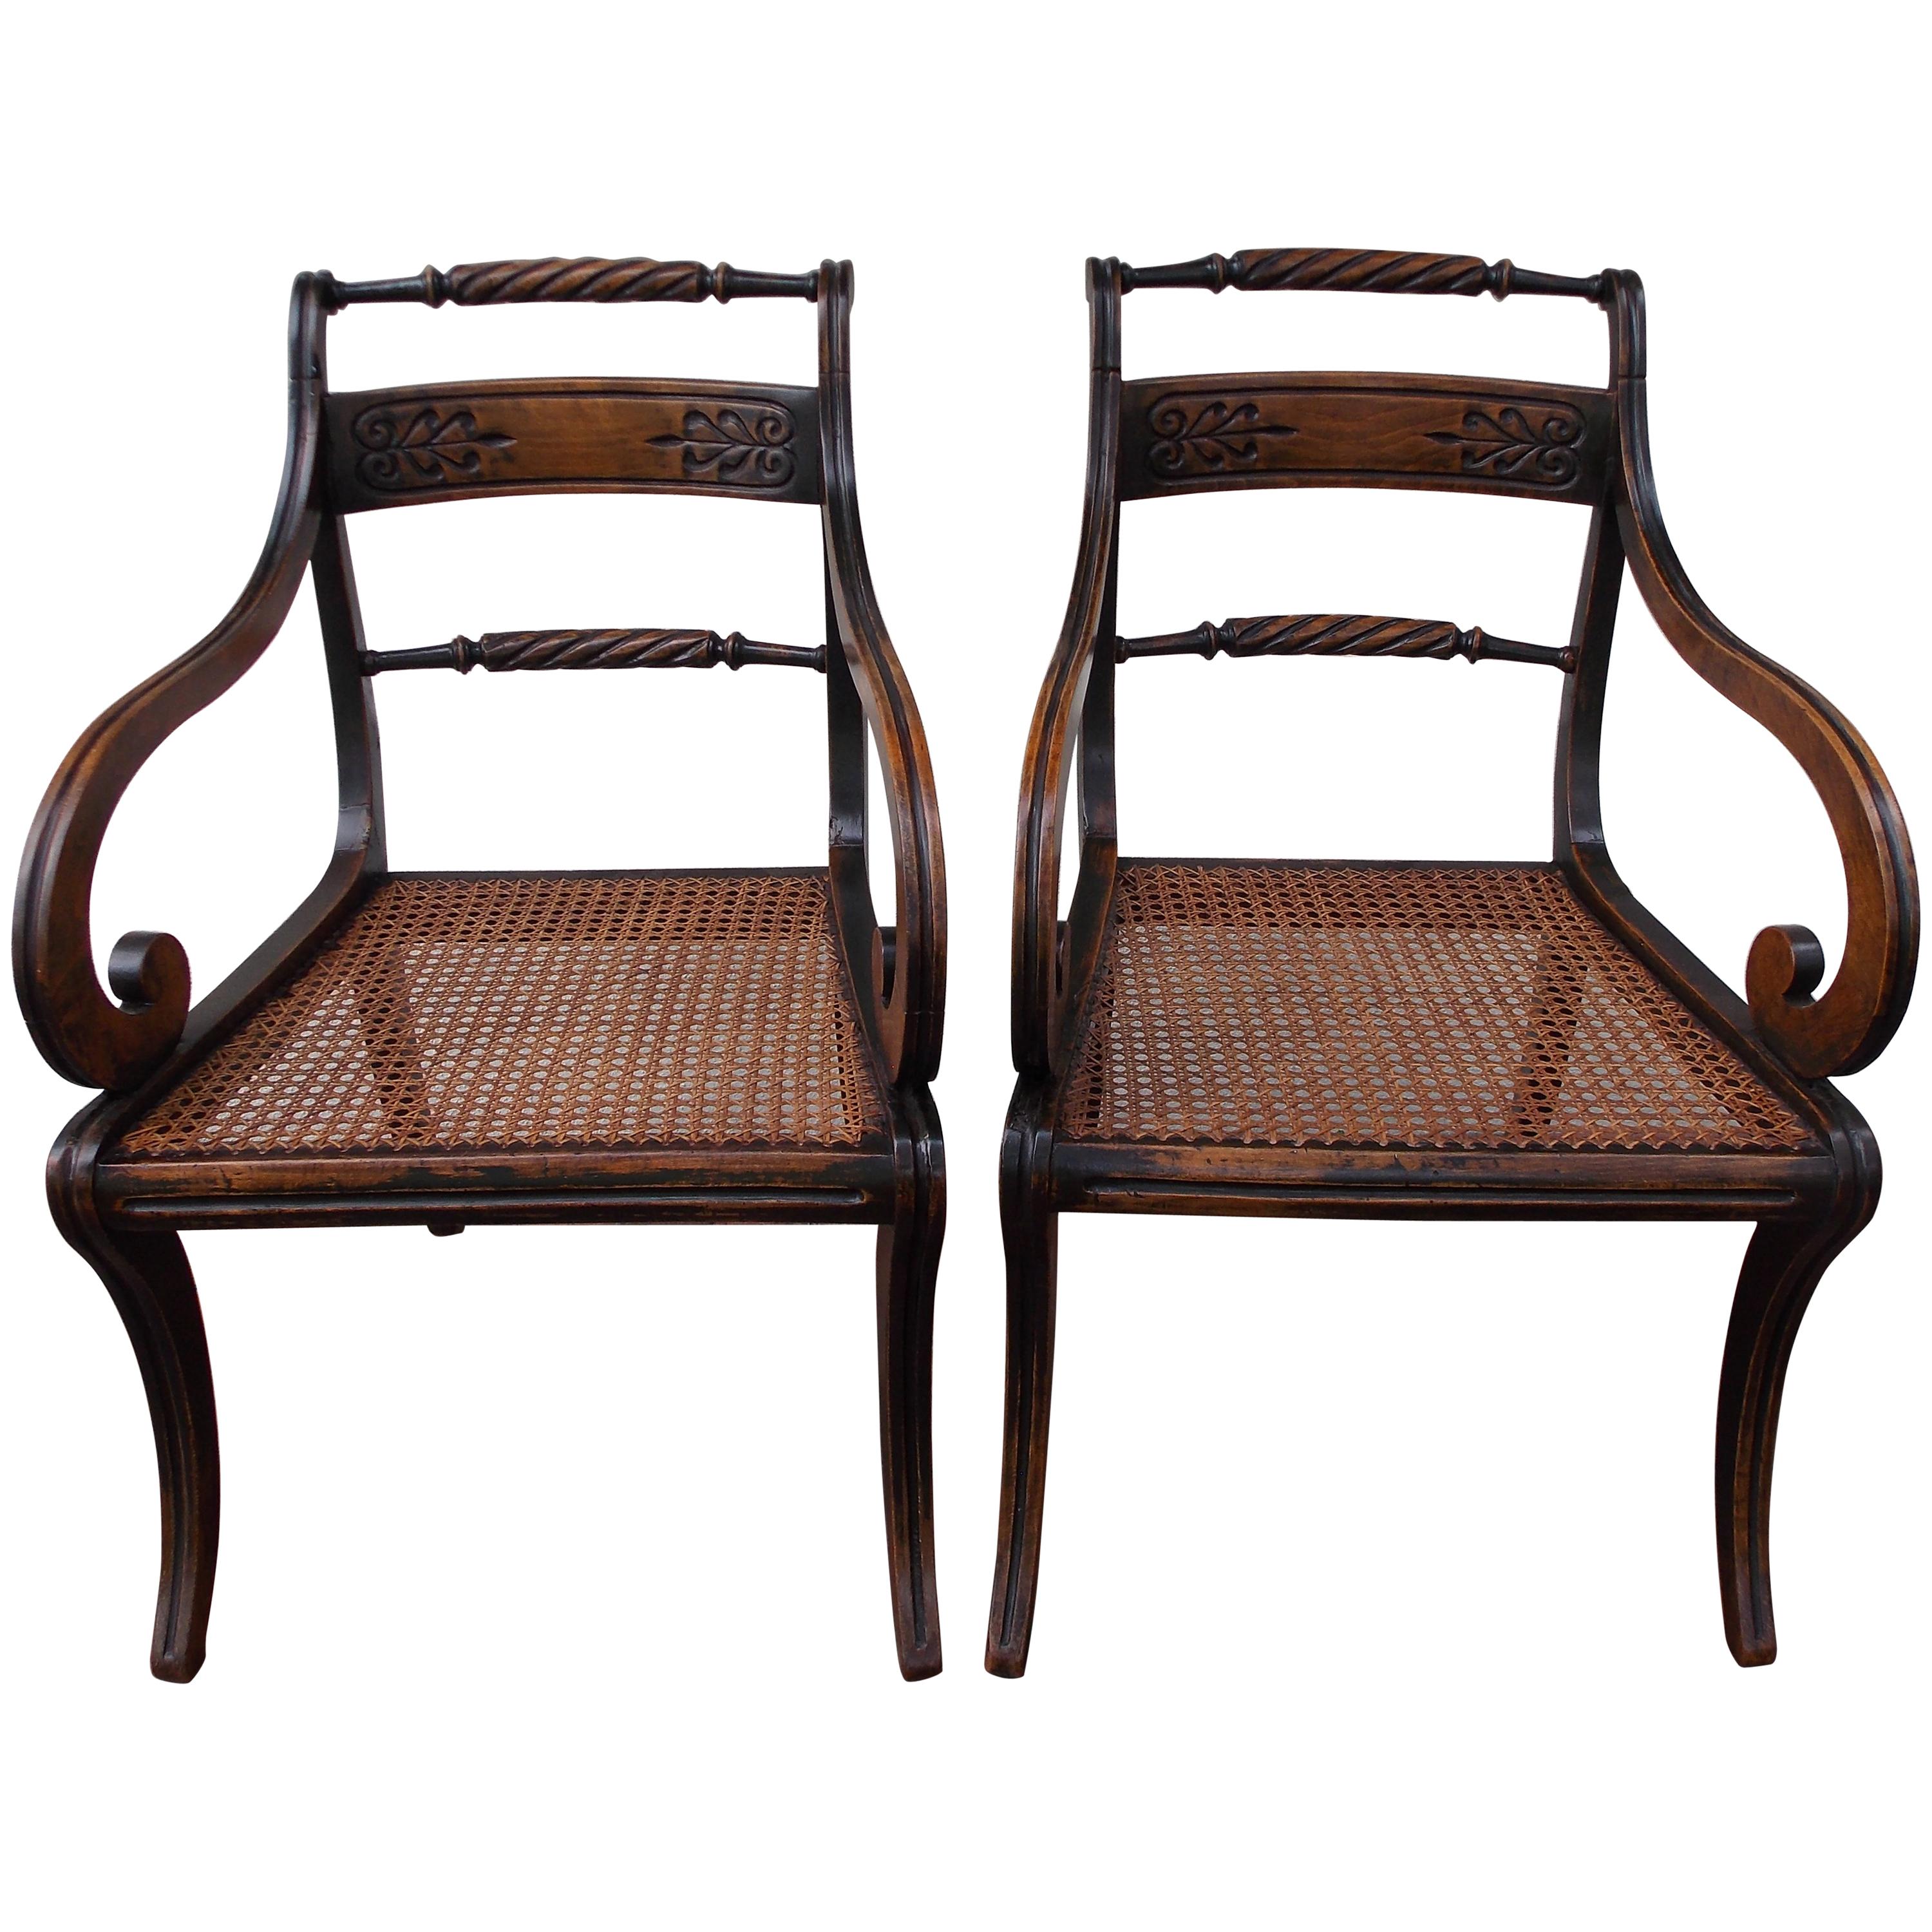 Pair of English Regency Black Lacquered and Cane Seat Armchairs, Circa 1815